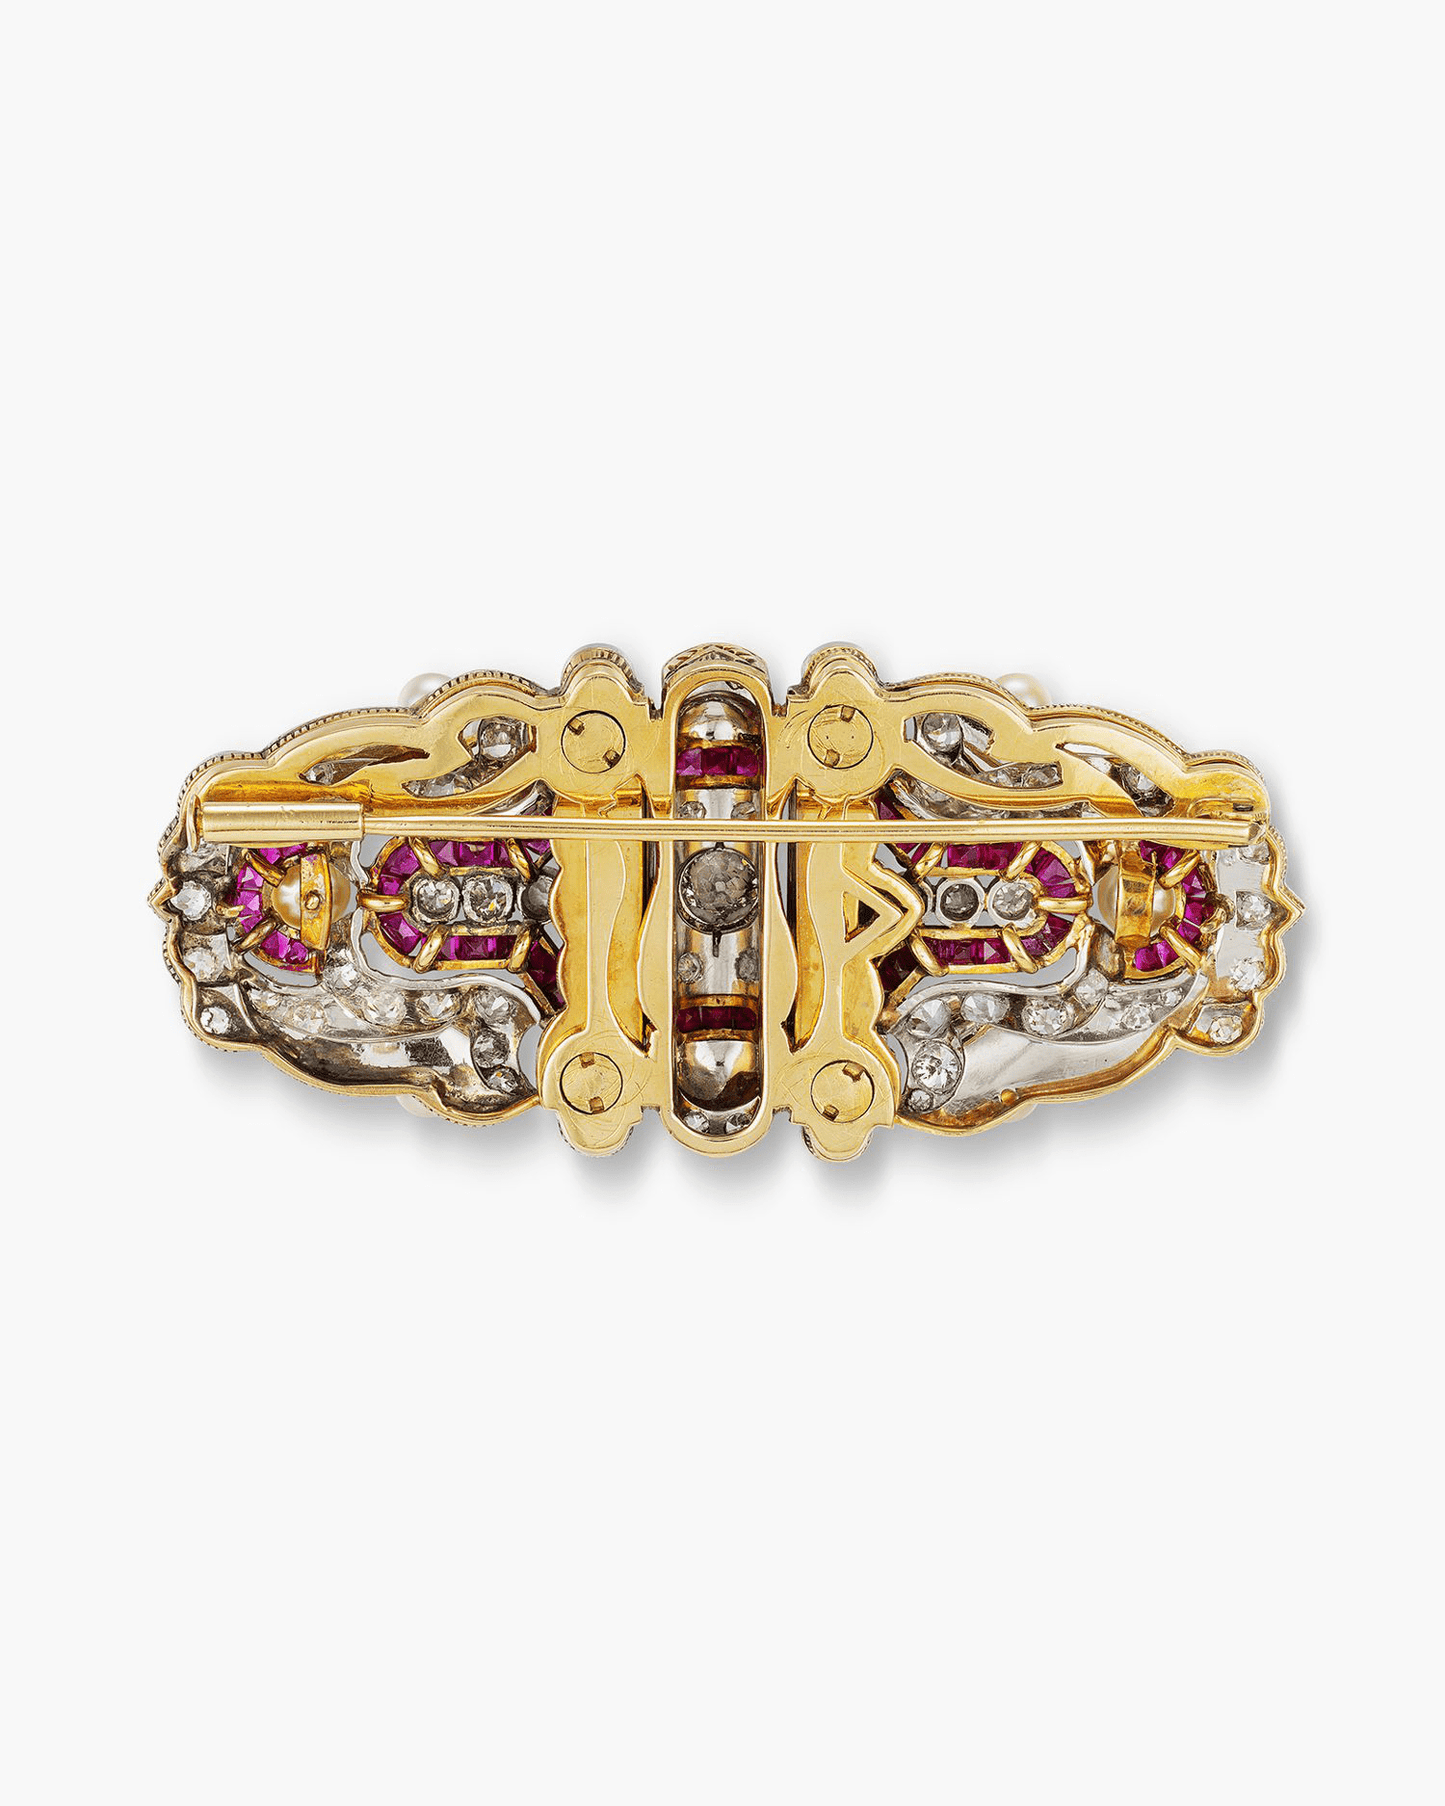 Art Deco Diamond, Pearl and Ruby Double Clip Brooch